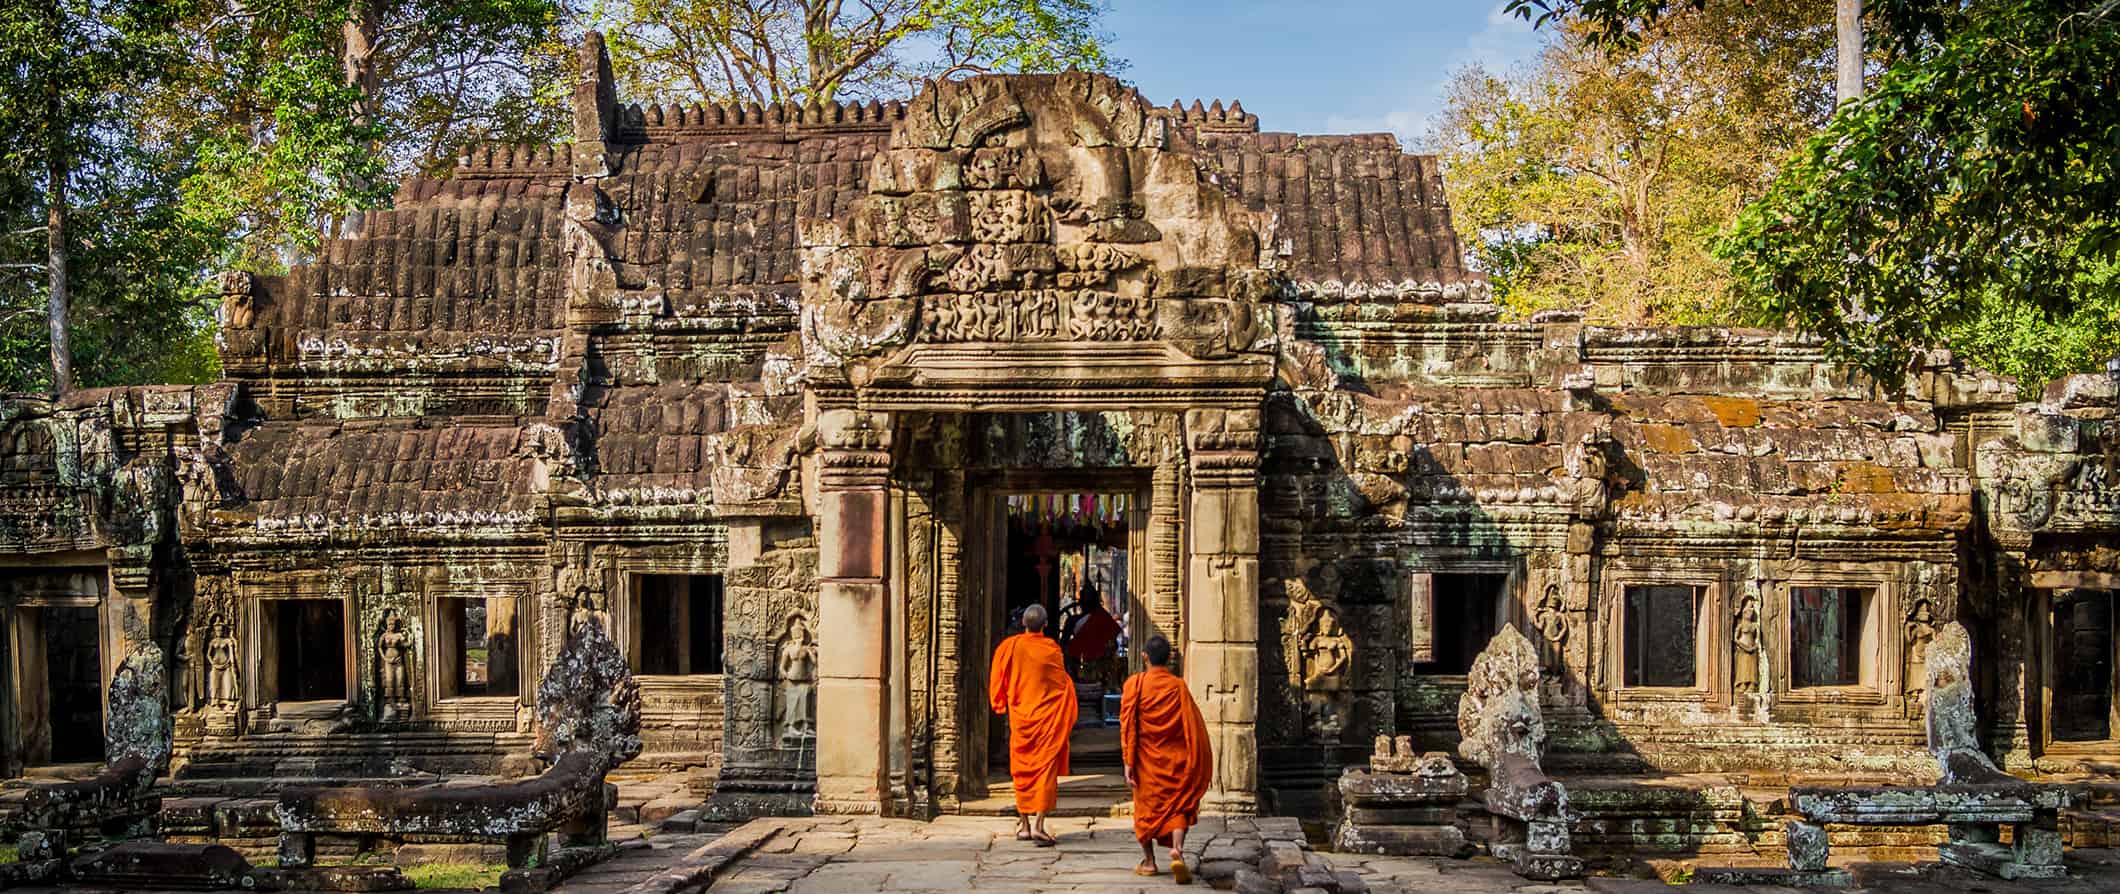 a view of Cambodia's Angkor Wat temple, with two monks in orange robes walking inside